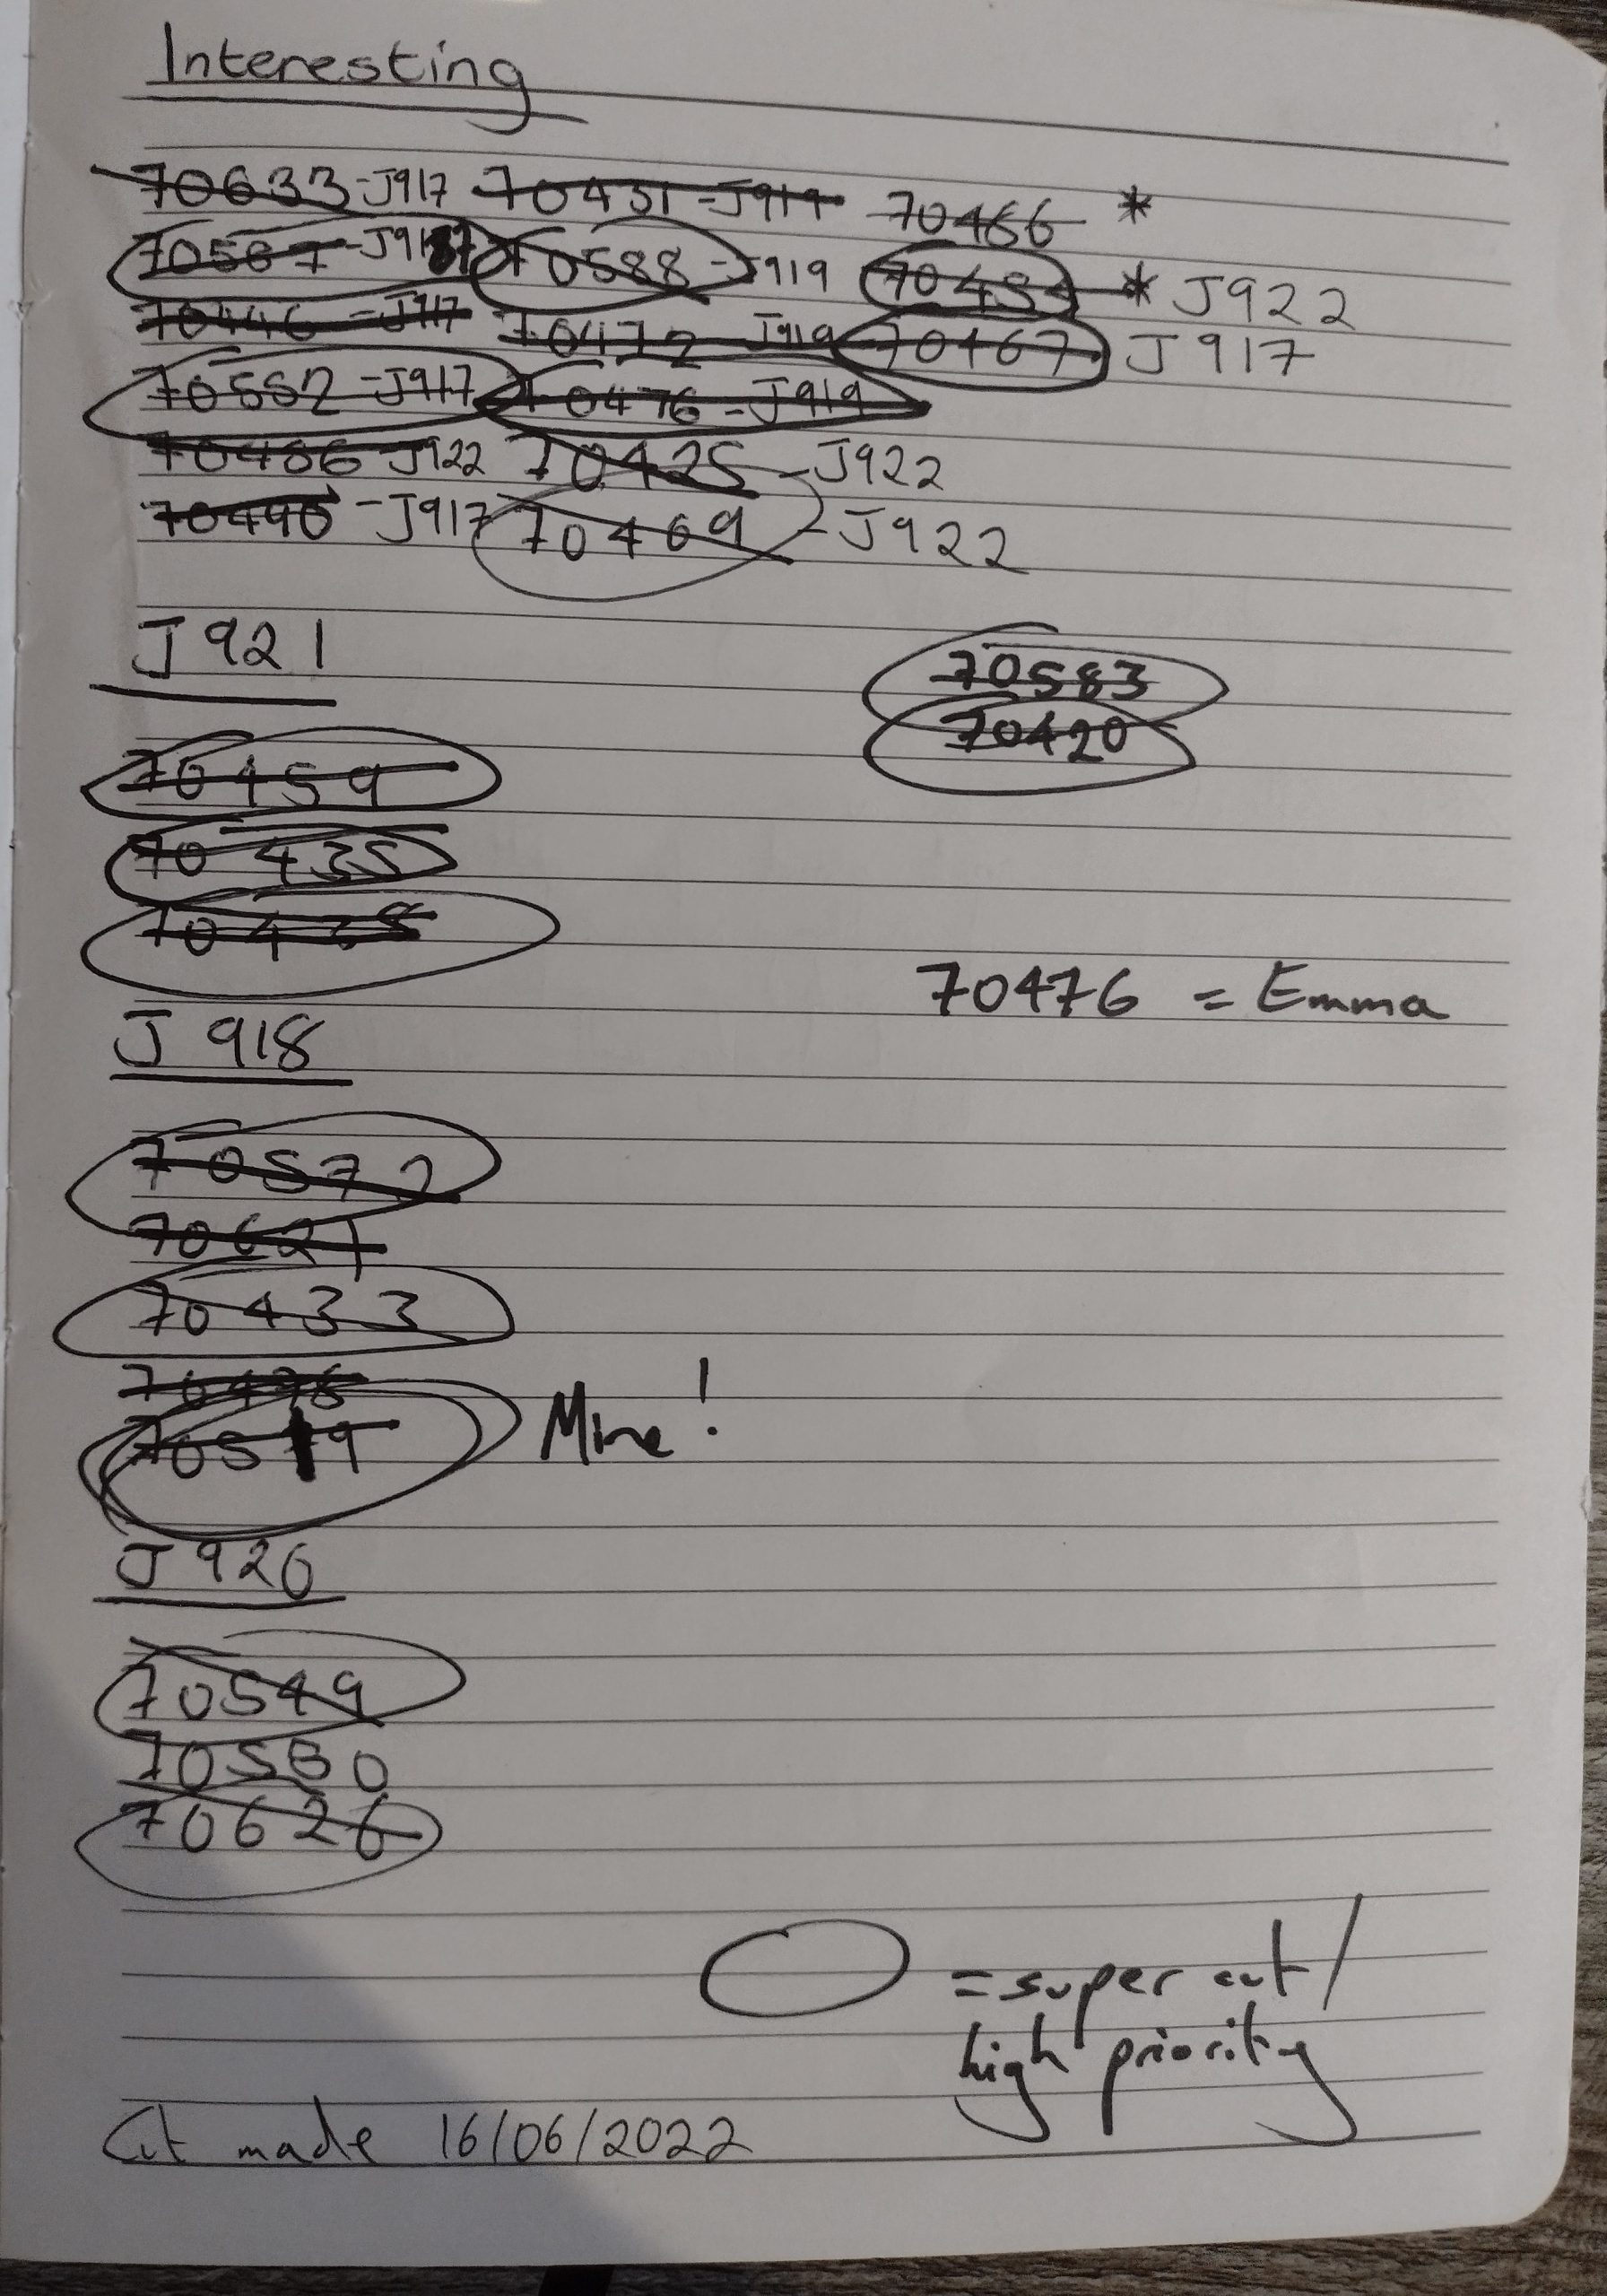 A list of object numbers handwritten in a notebook with the title 'Interesting'. Some numbers are circled and/or have lines struck through them. Next to the number 70519 is written 'Mine!'